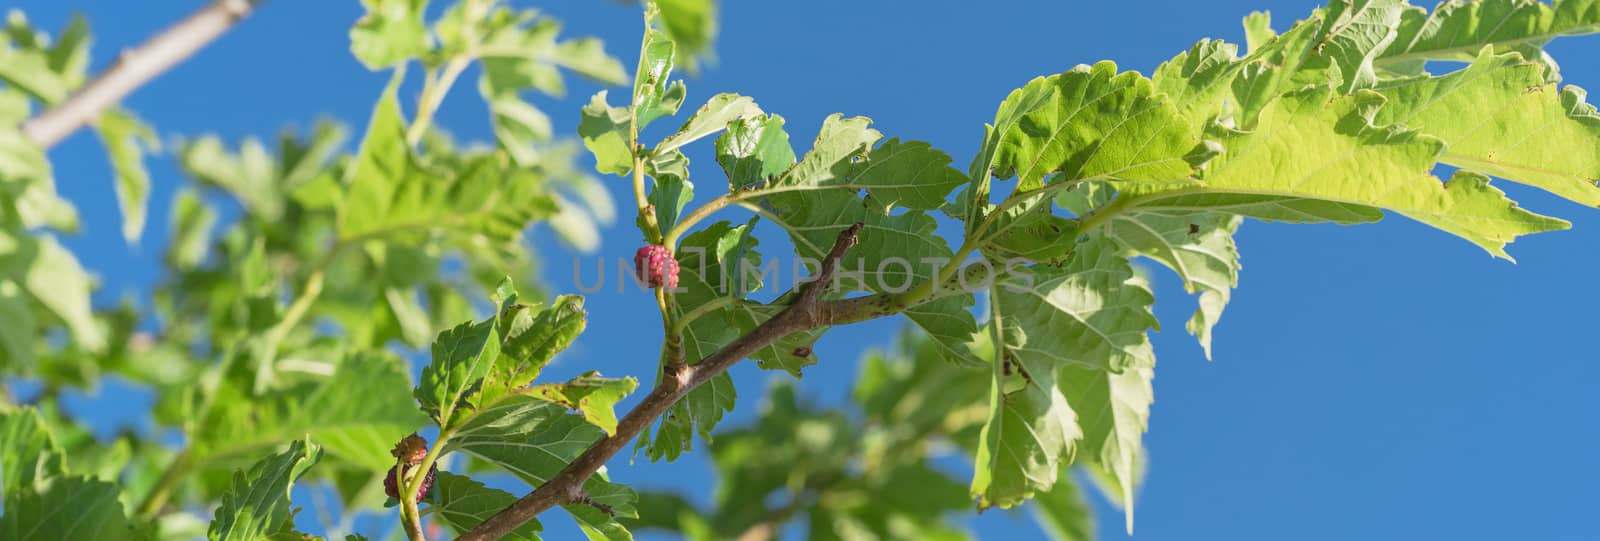 Panorama close-up view of sweet black mulberry morus nigra growing on tree branches near Dallas, Texas, America. Mulberries fruits ready to pickup in May harvest season